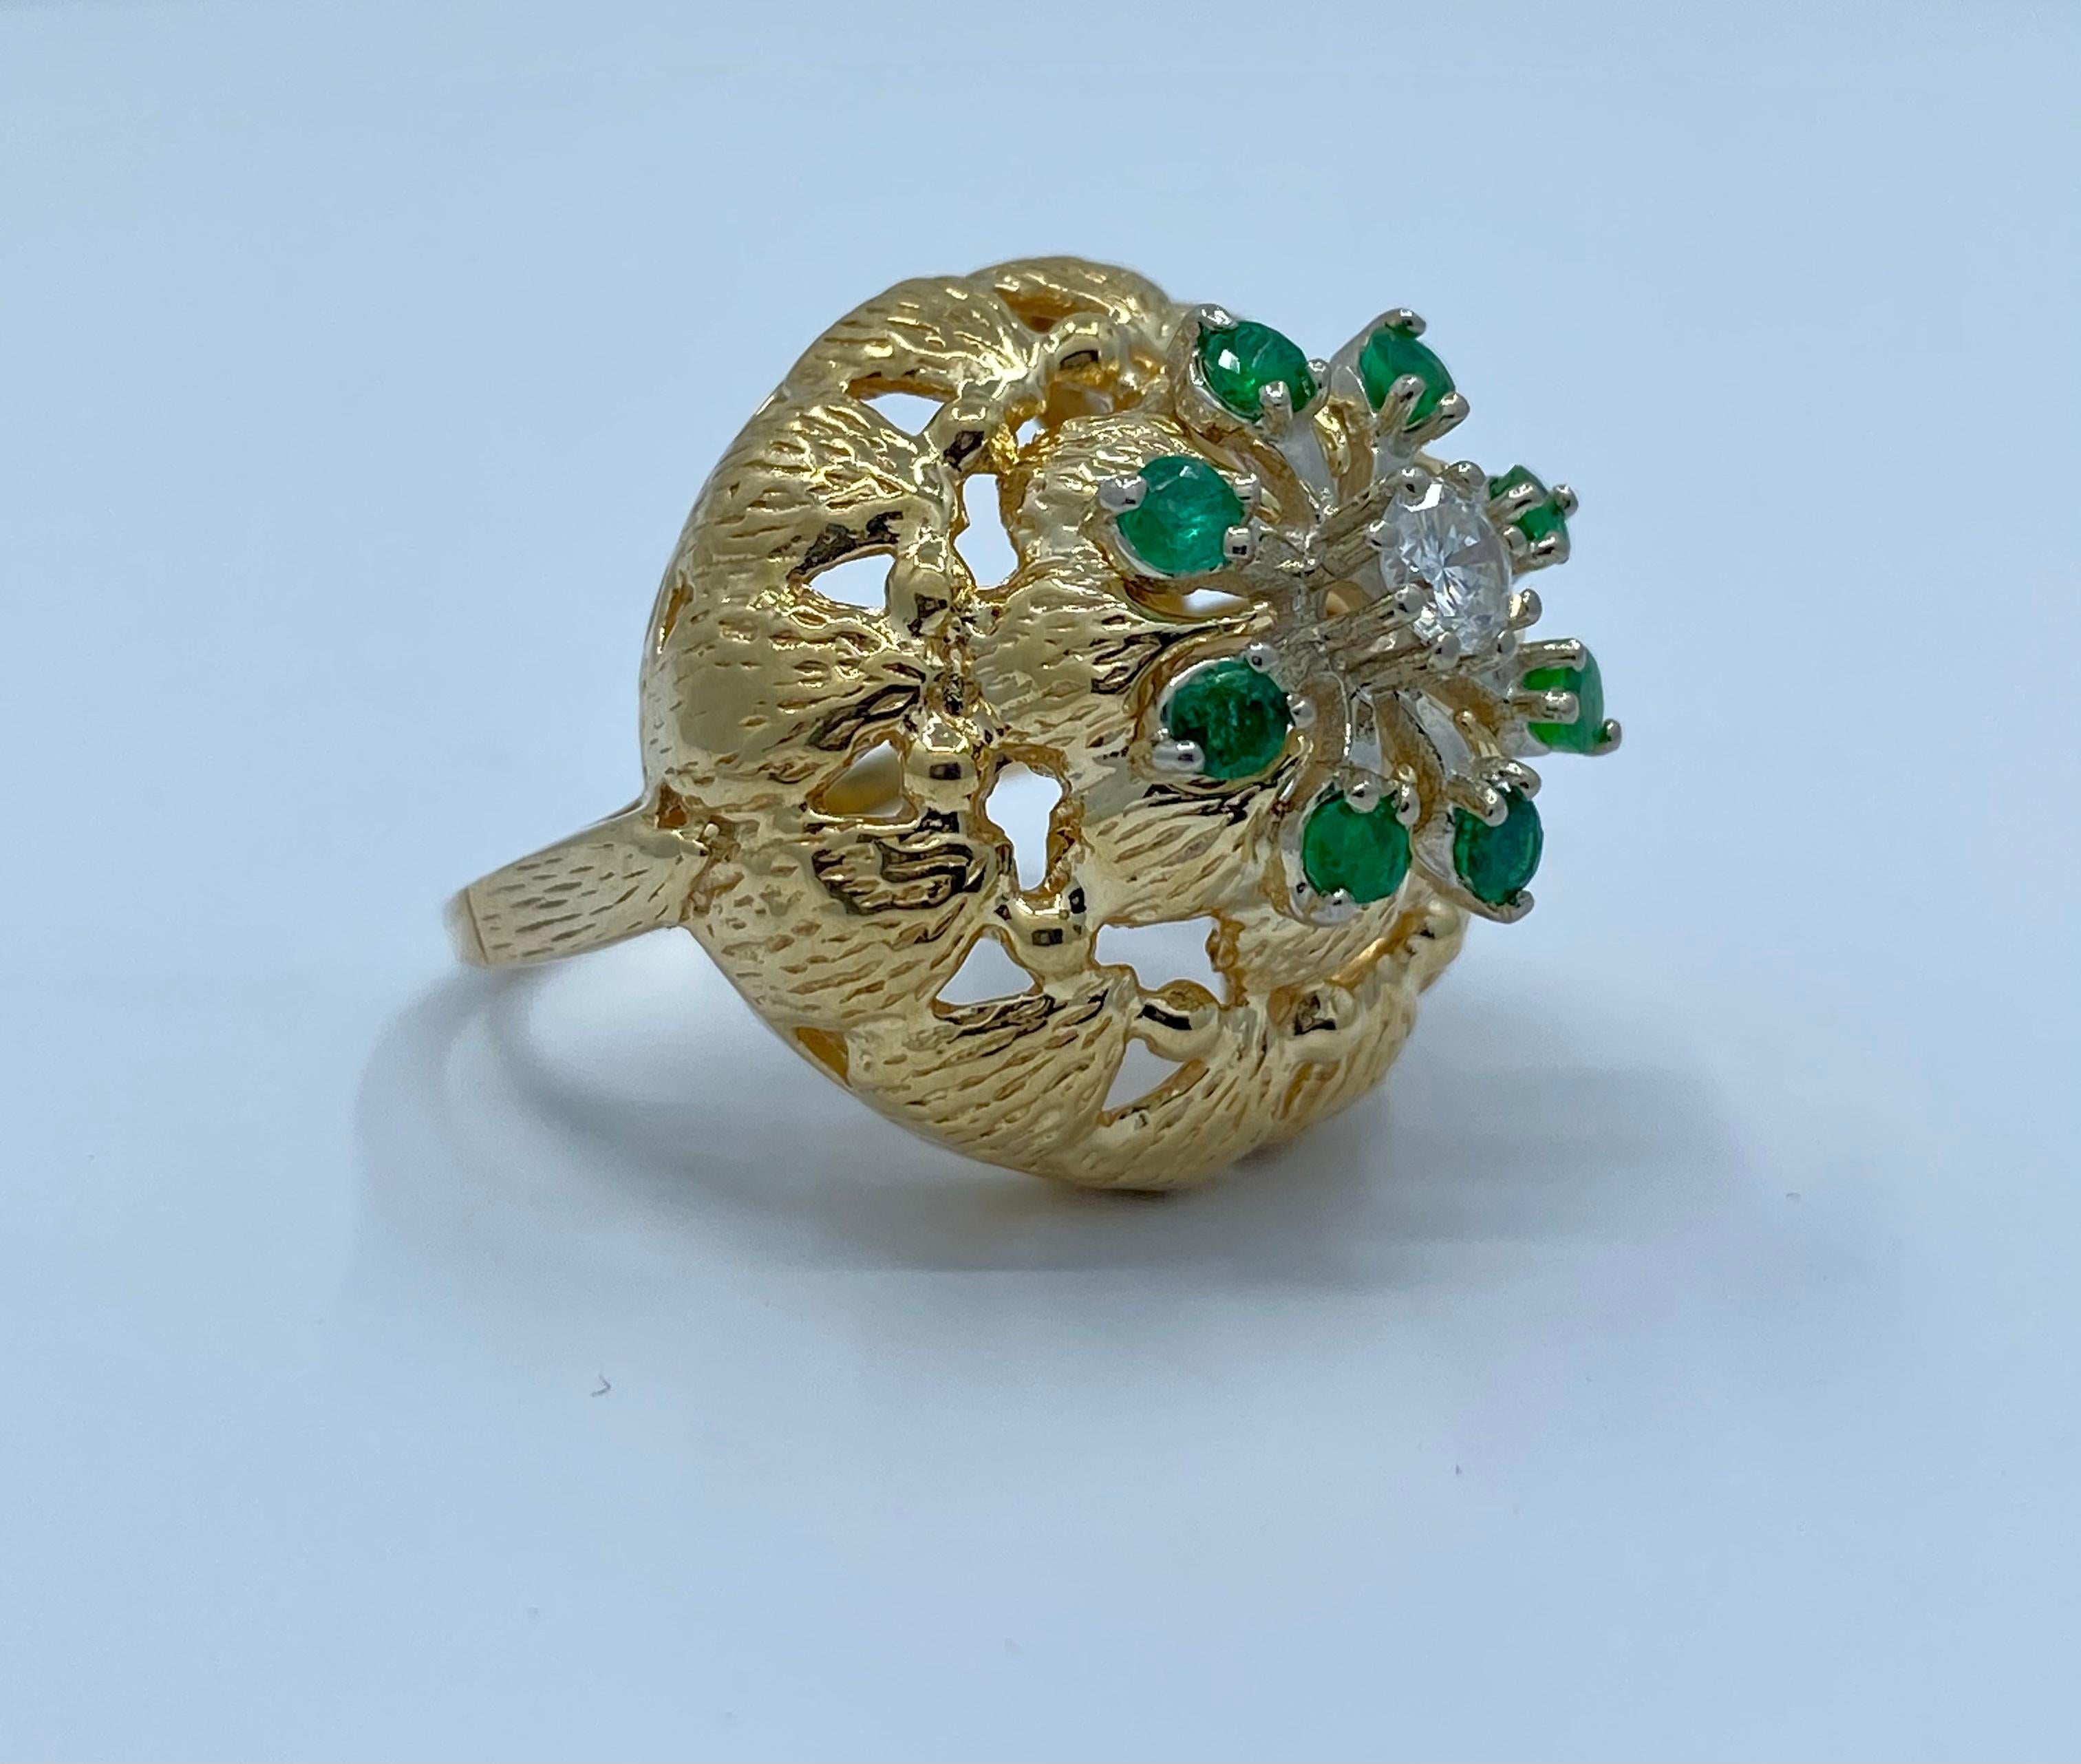 Very unique and artistic, custom-made, mid-century flower motif estate dome ring, features eight vivid green round Columbian emeralds and one round brilliant sparkling diamond in the center adorning the face. Unique as could be, this flower motif